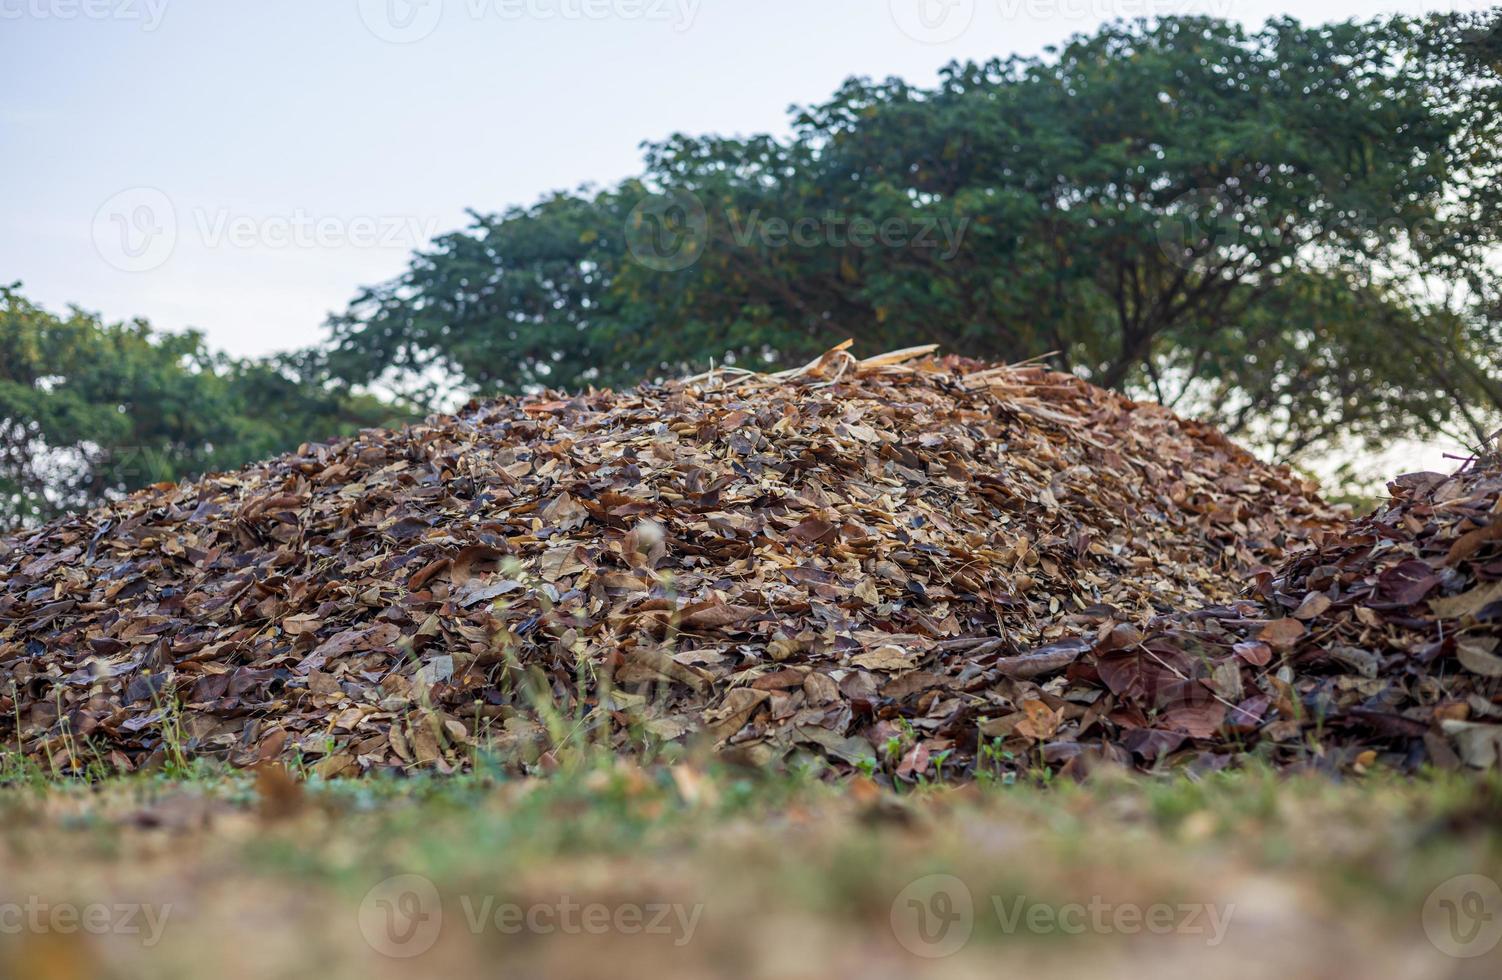 Low angle foreground through the grass on the ground to the many piles of dry leaves. photo